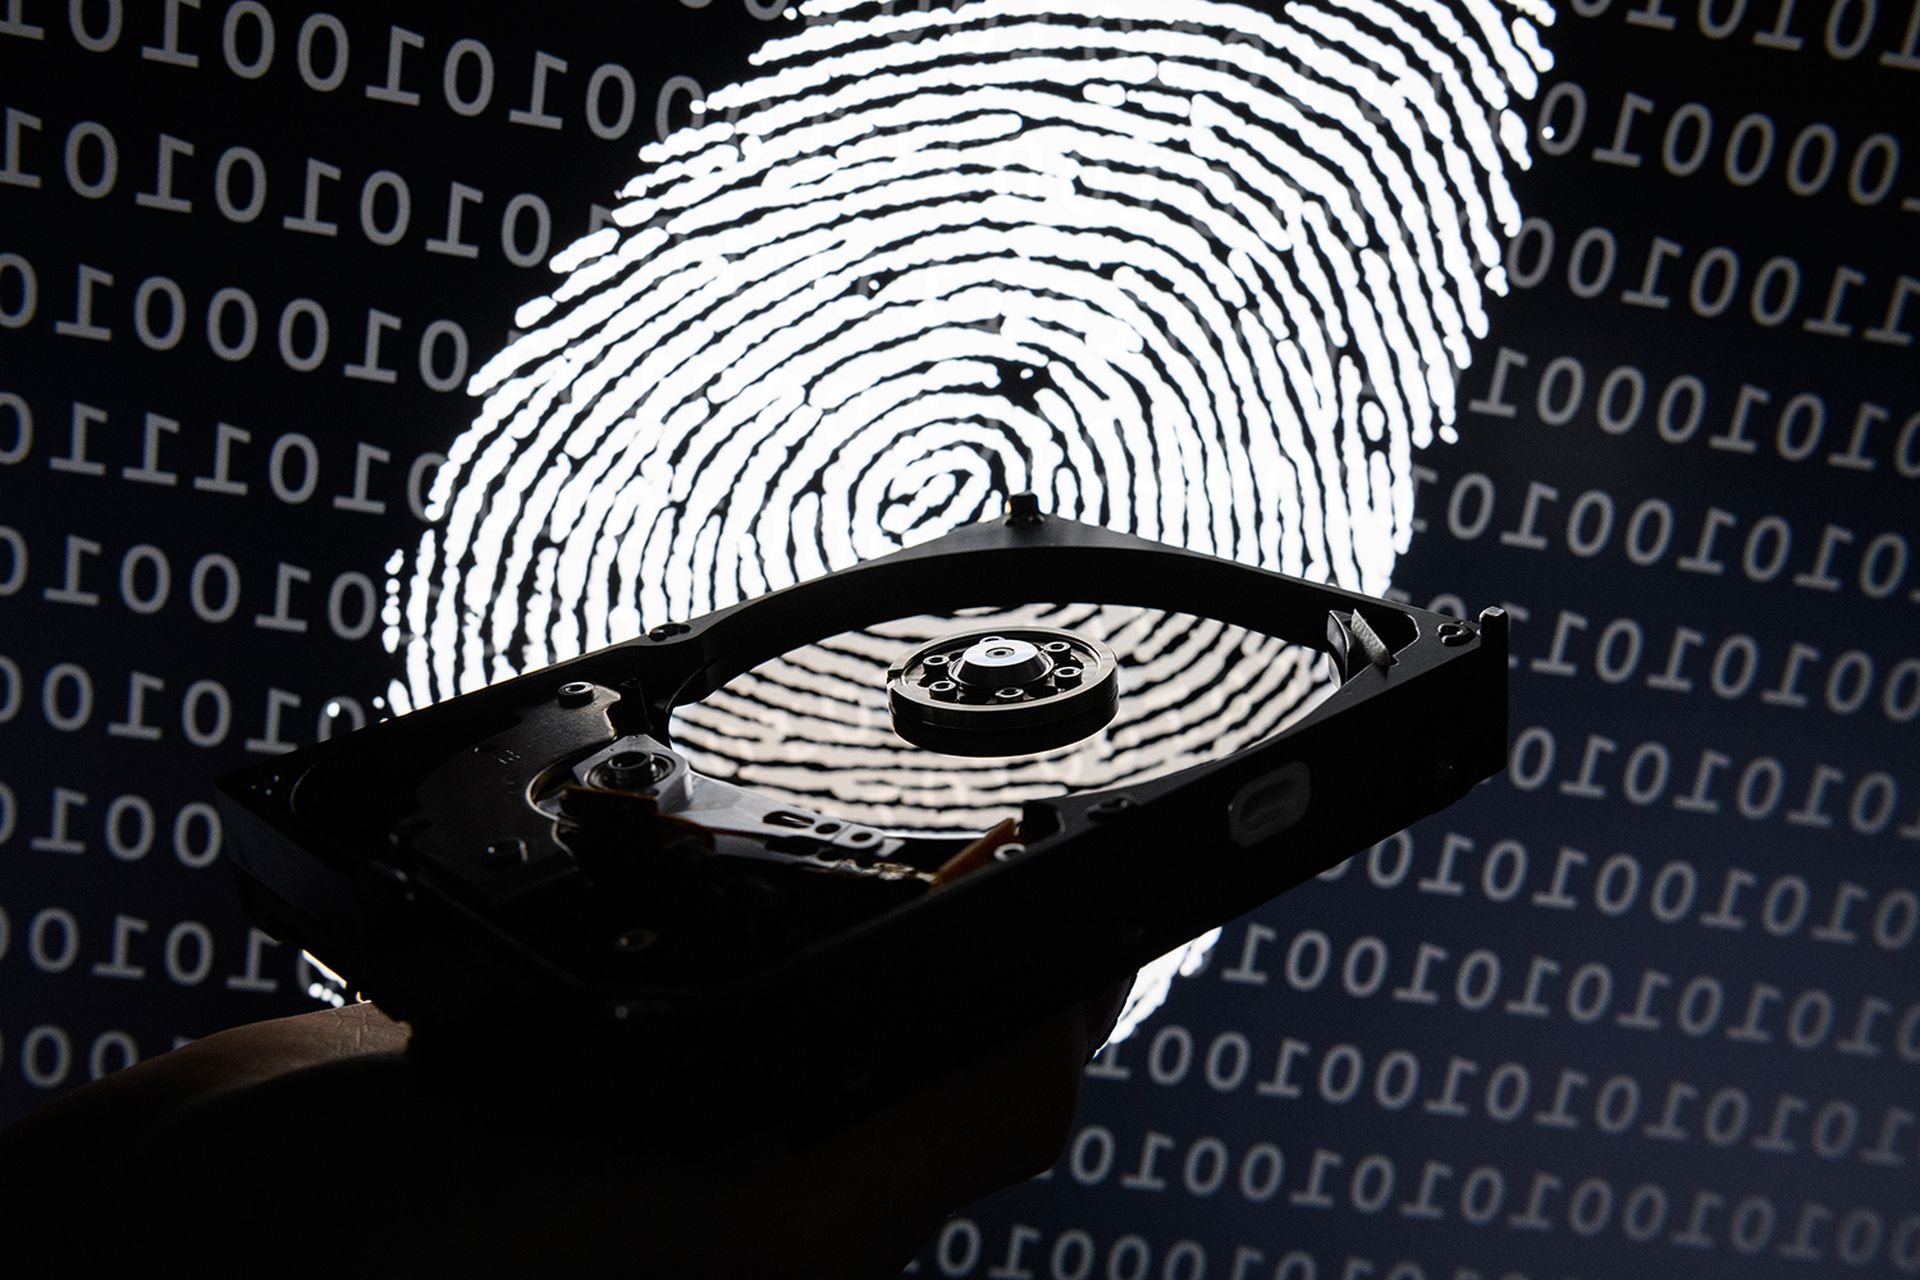 A hard drive is seen in the light of a projection of a thumbprint.